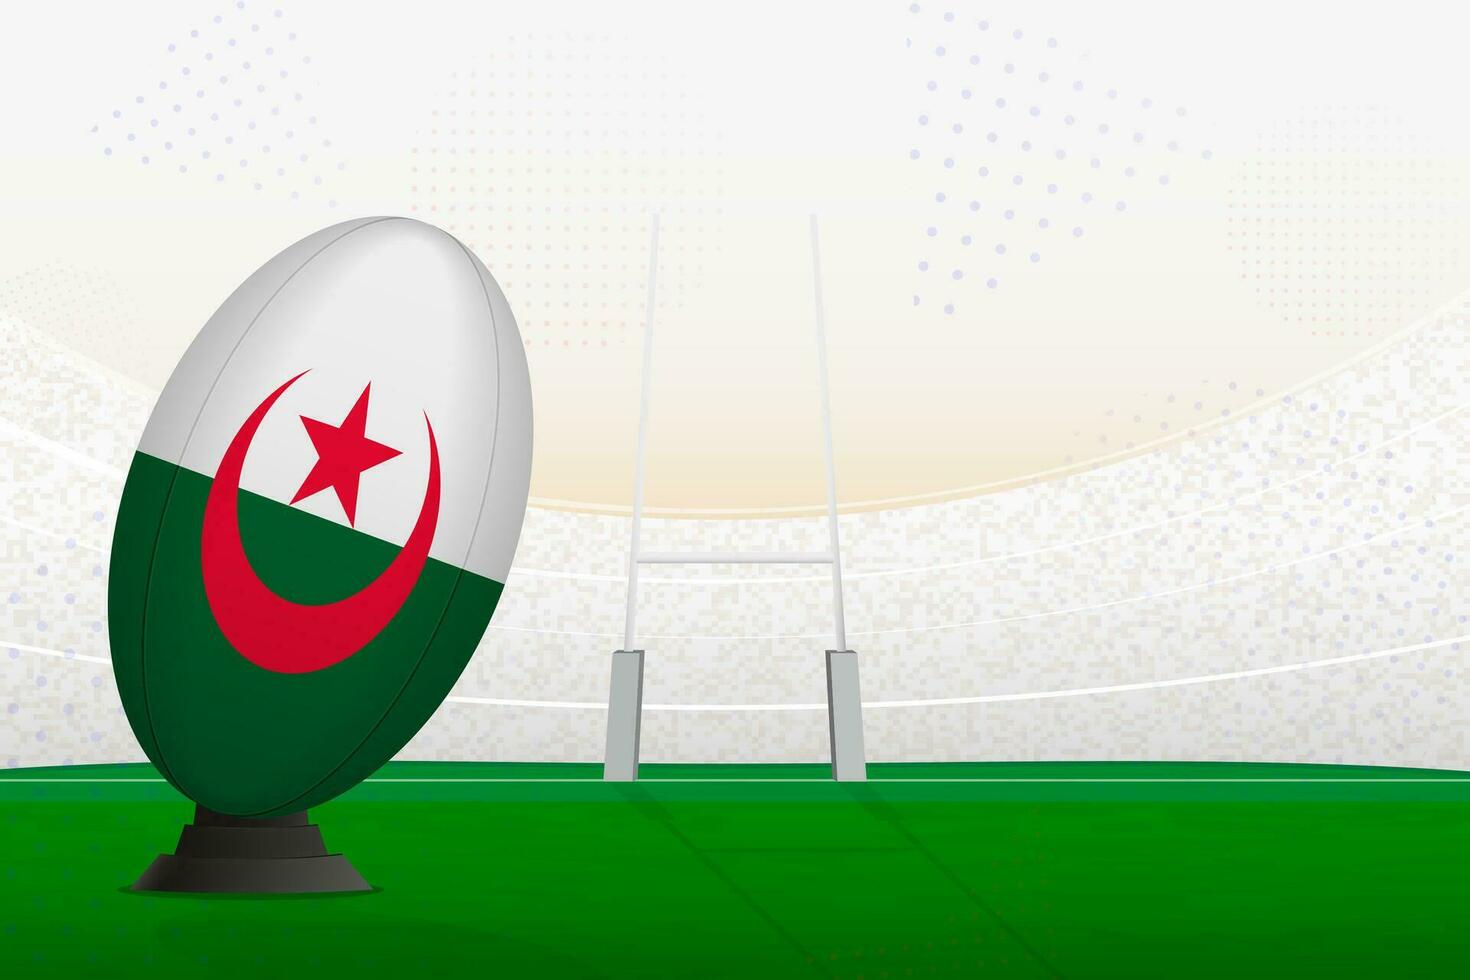 Algeria national team rugby ball on rugby stadium and goal posts, preparing for a penalty or free kick. vector